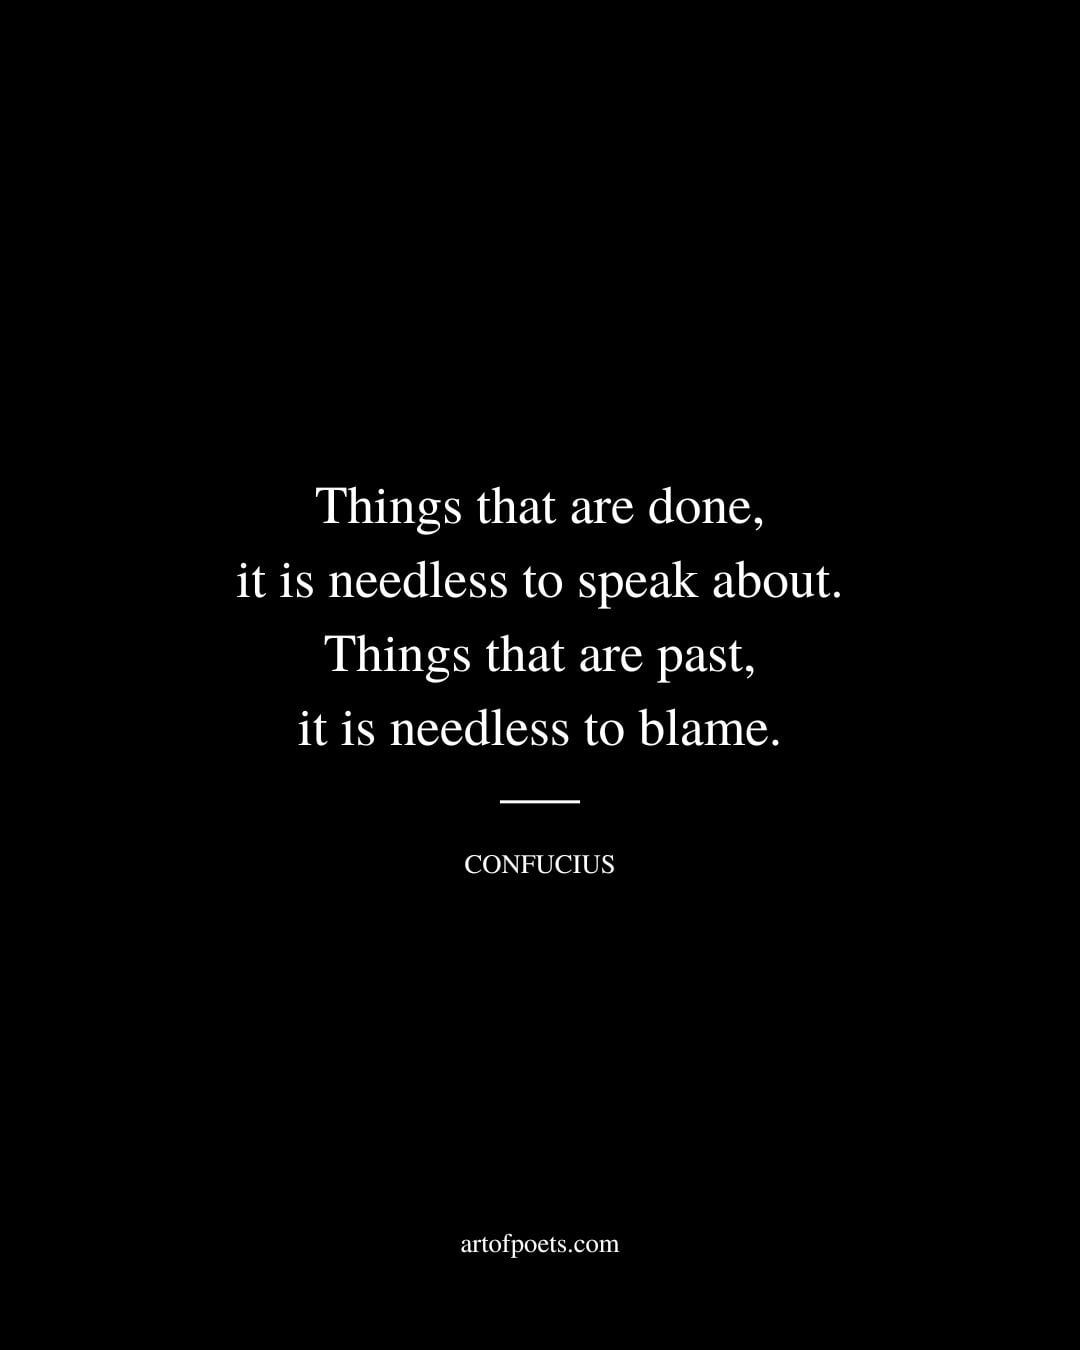 Things that are done it is needless to speak about…things that are past it is needless to blame 1